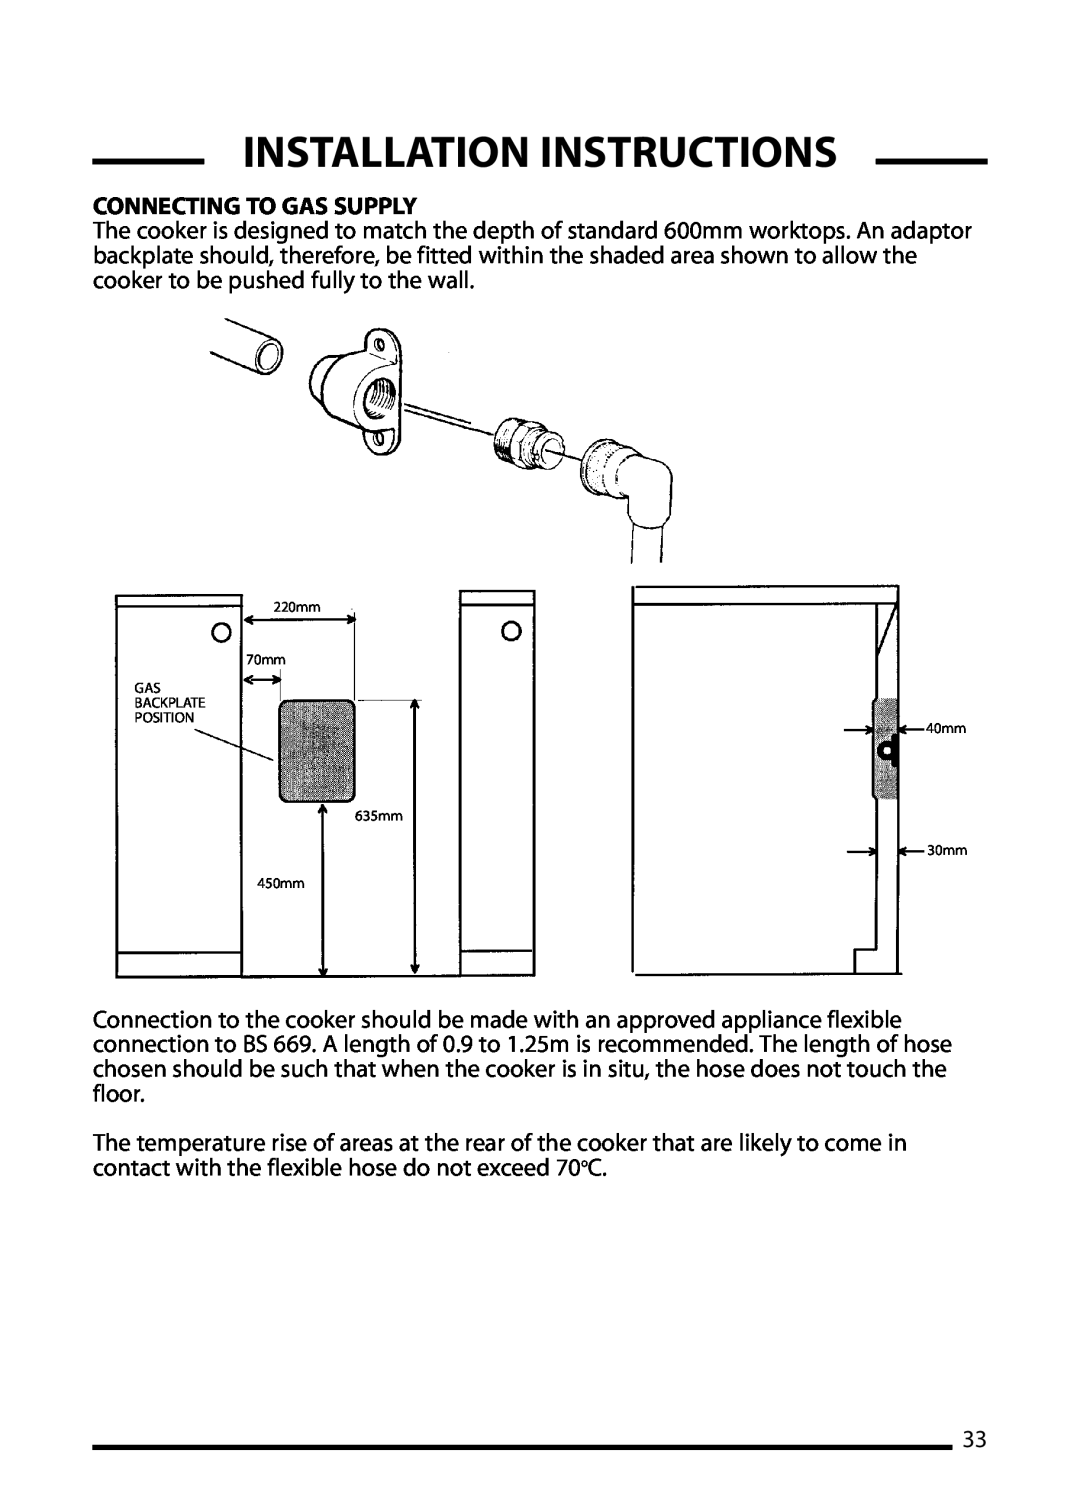 Cannon 10410G, ICON 600 installation instructions Connecting To Gas Supply, Installation Instructions 